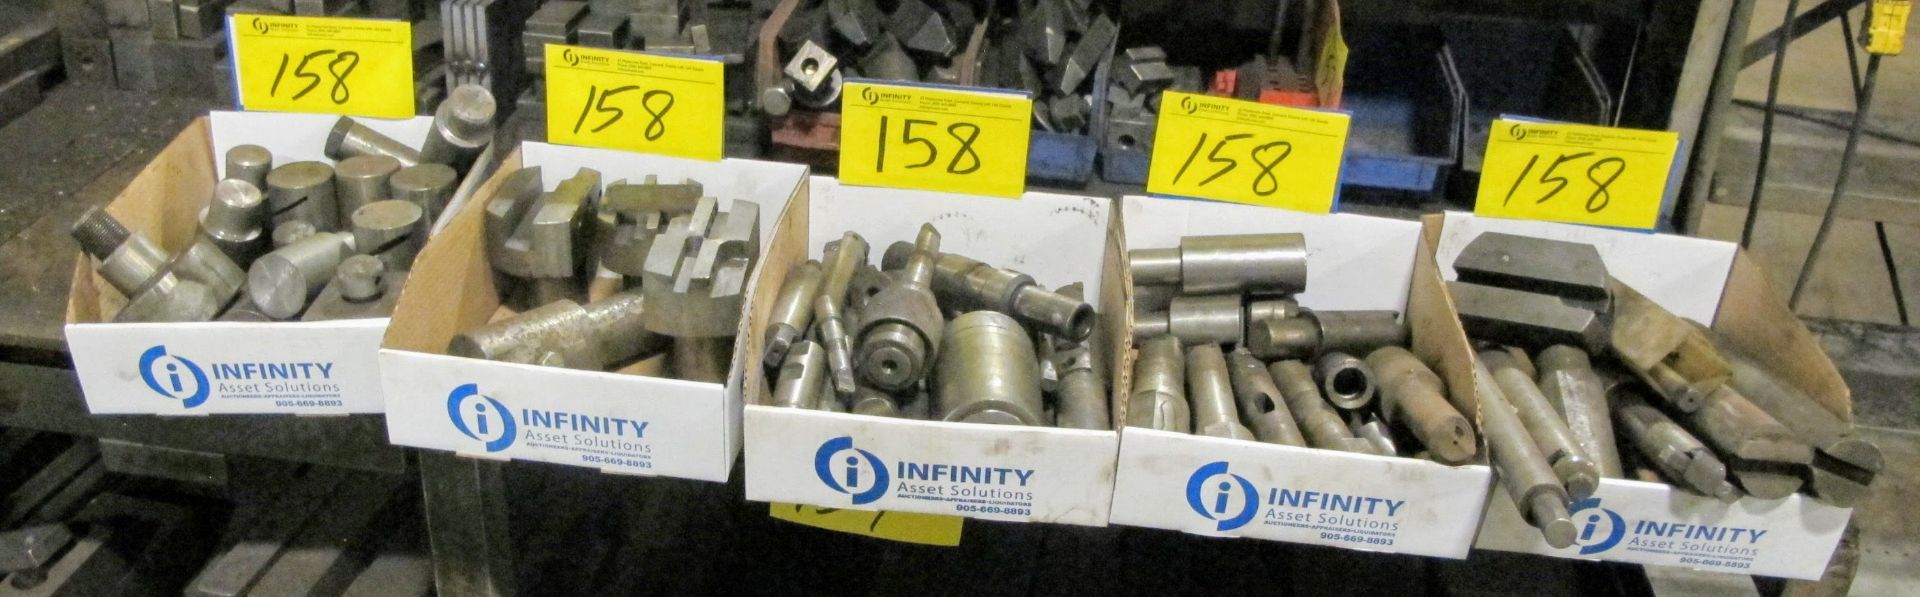 LOT OF 5 BOXES OF CUTTING HEADS, TOOL HOLDERS, BORING BARS, ETC